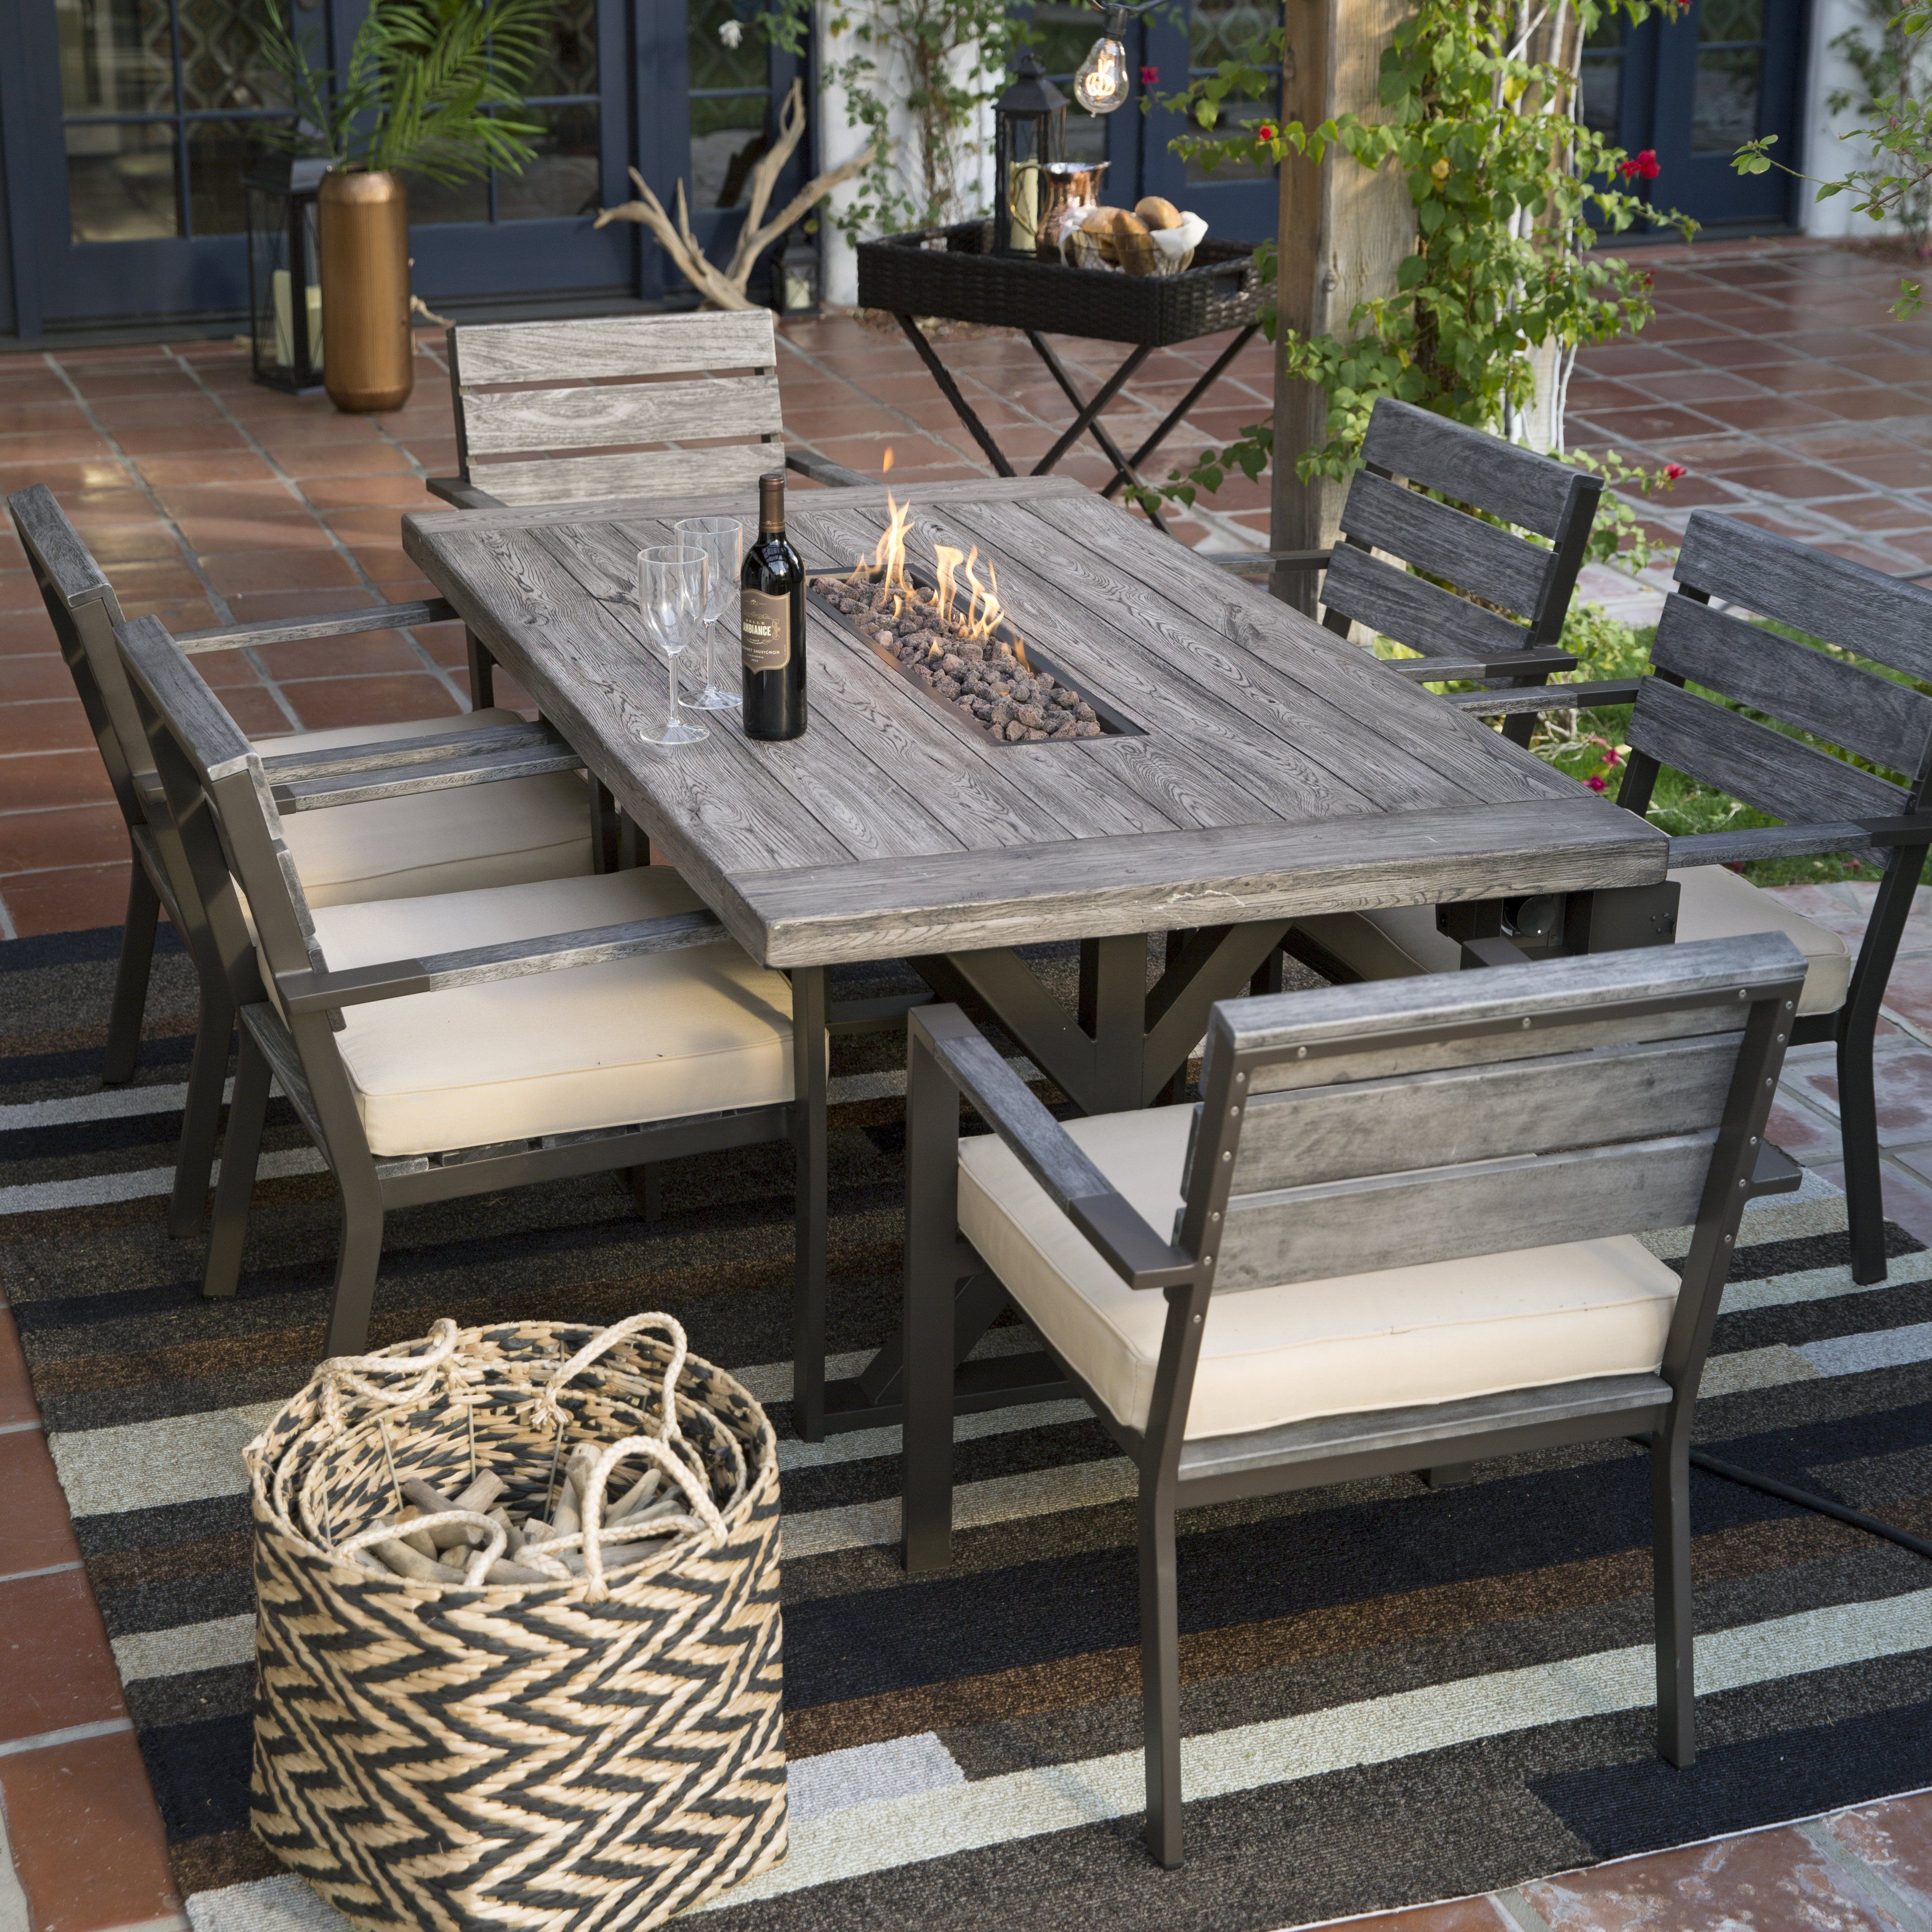 20 Delightful Outdoor Dining Area Design Ideas Patio throughout sizing 3840 X 3840